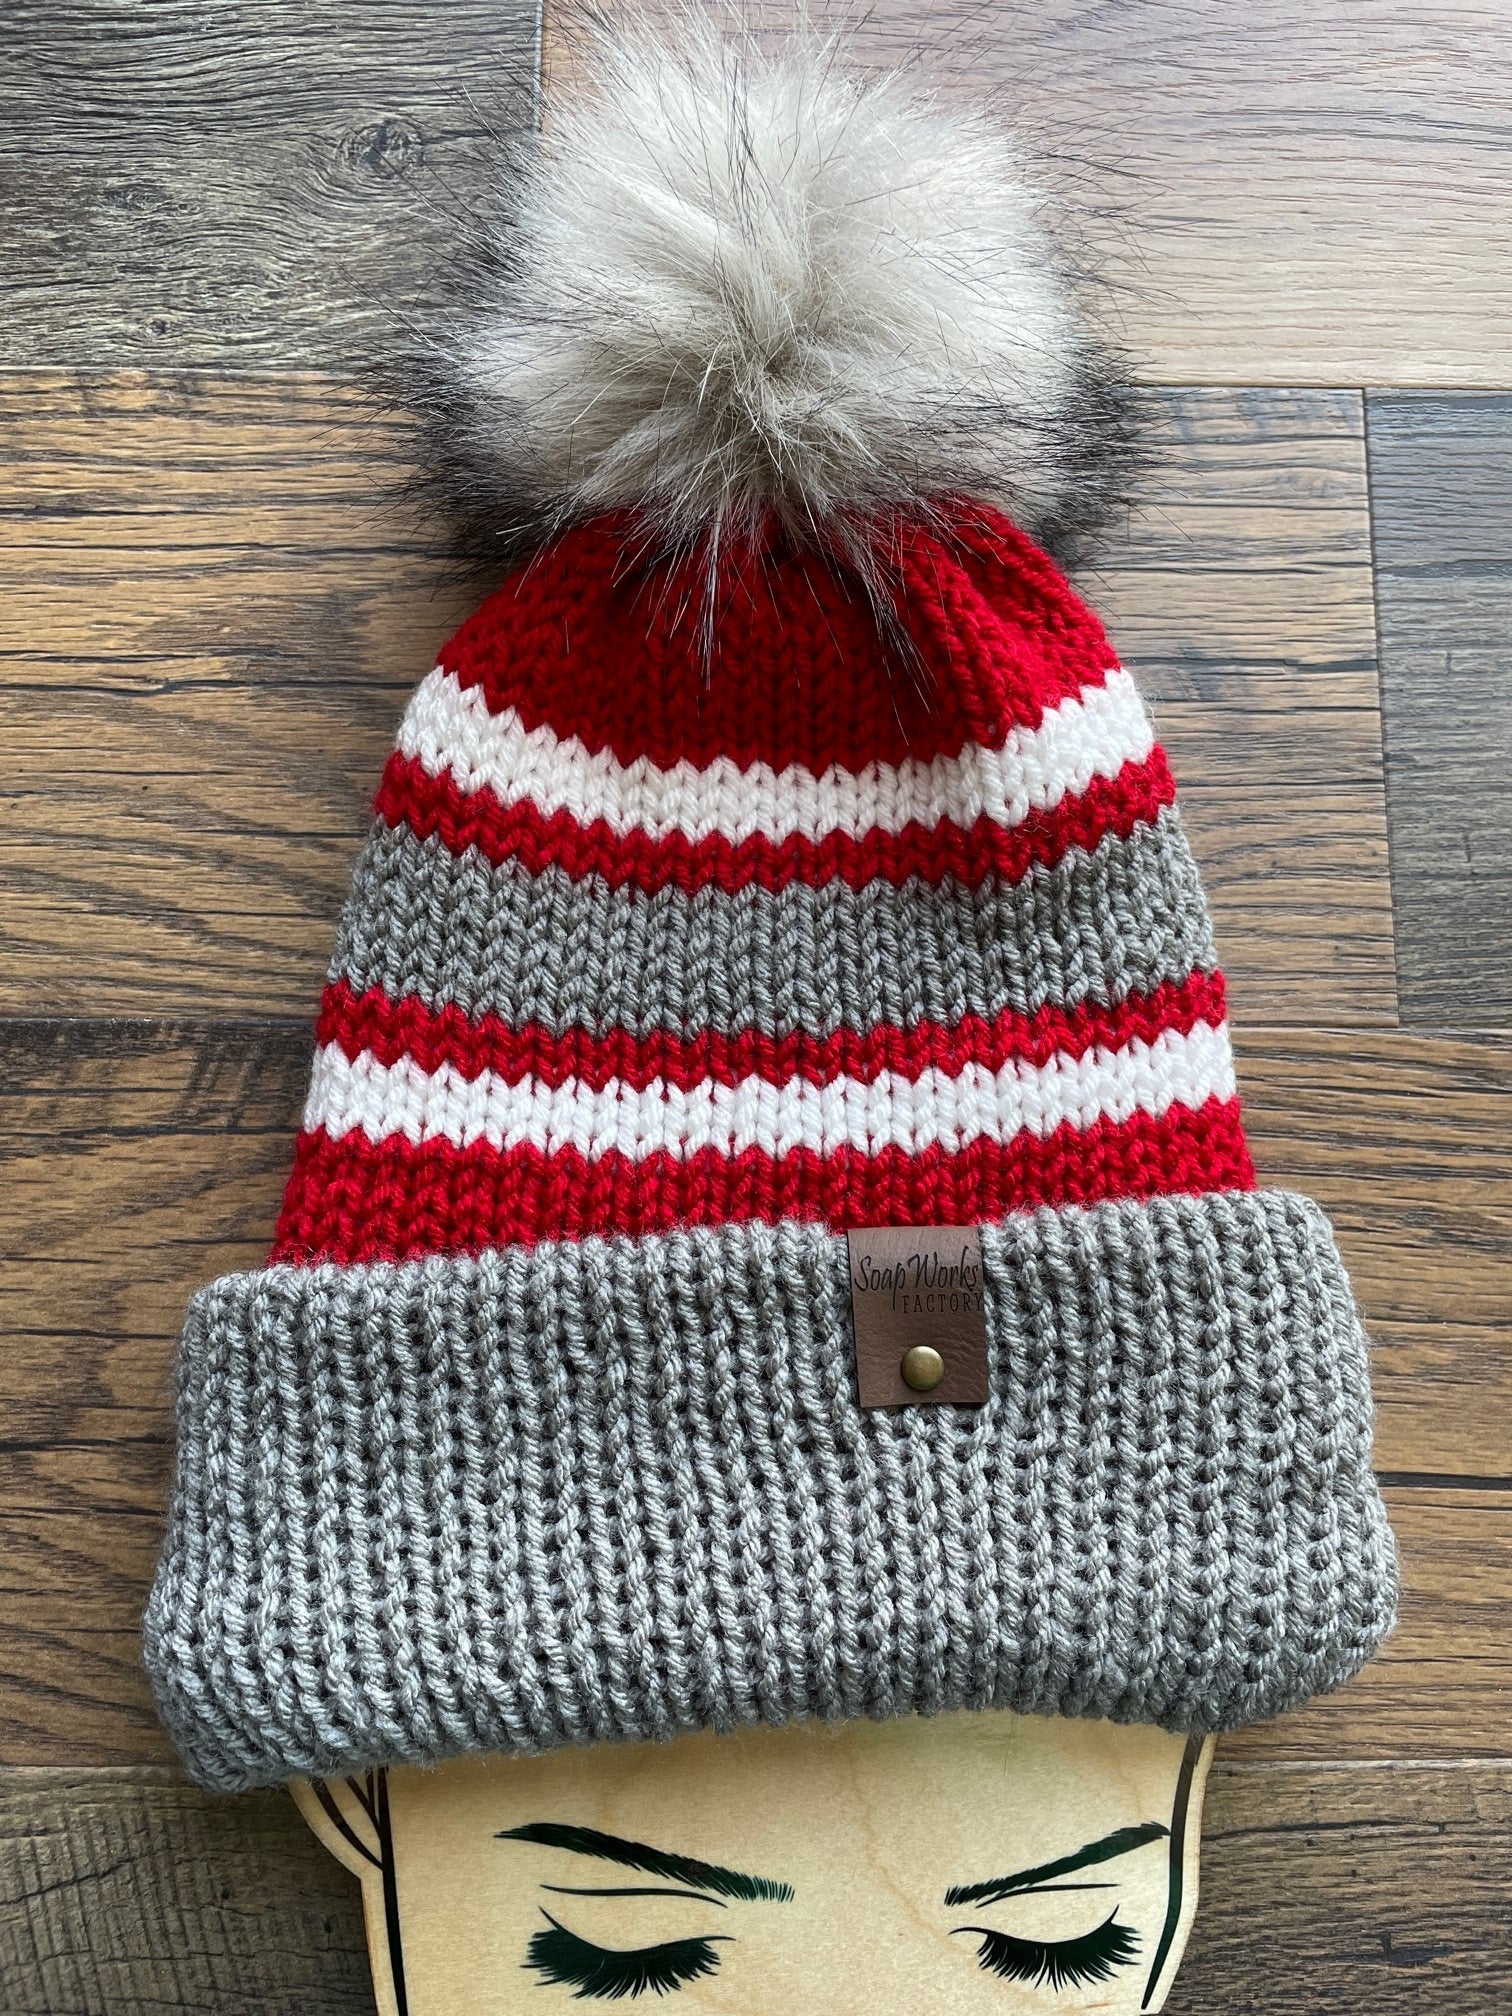 homemade knit hat scarlet and grey